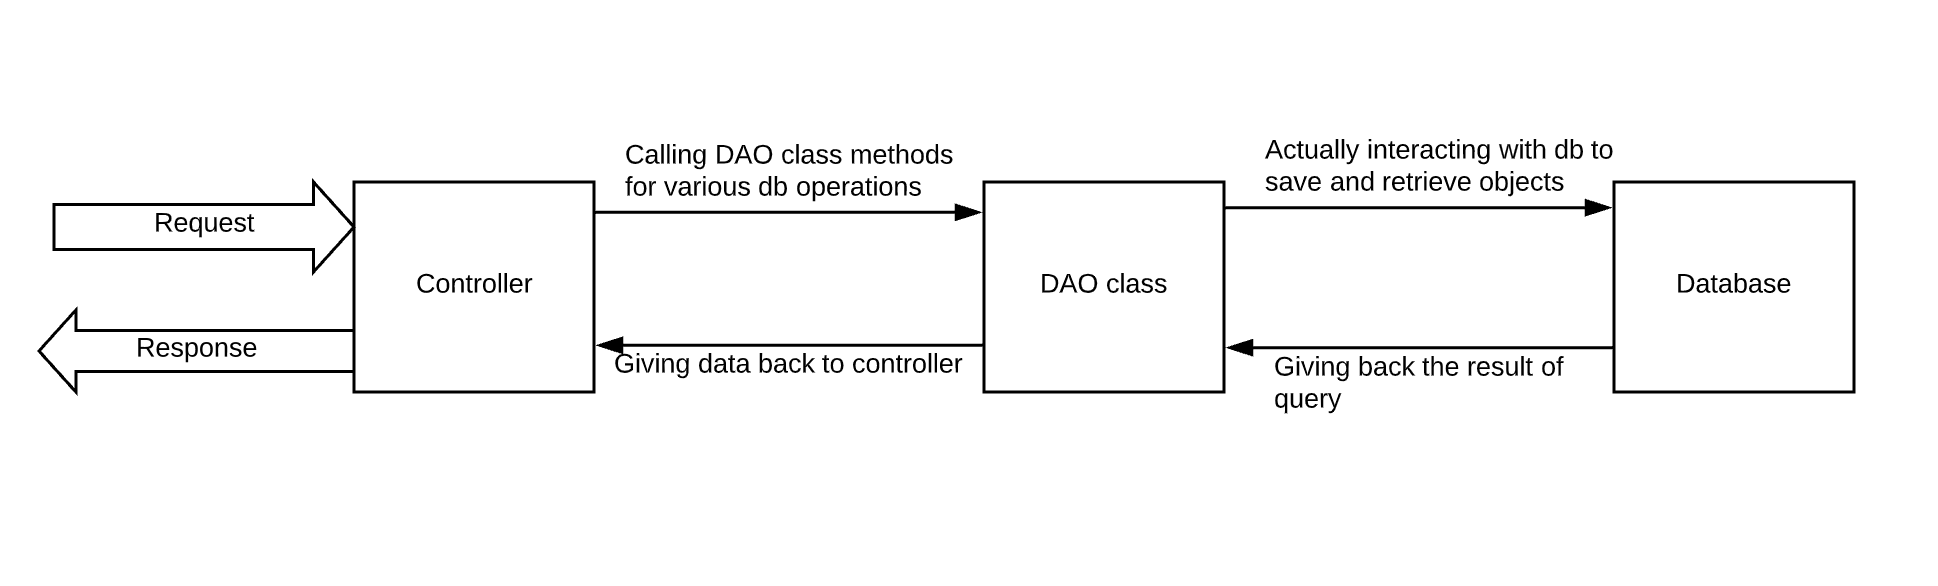 Controller and DAO class interaction with db